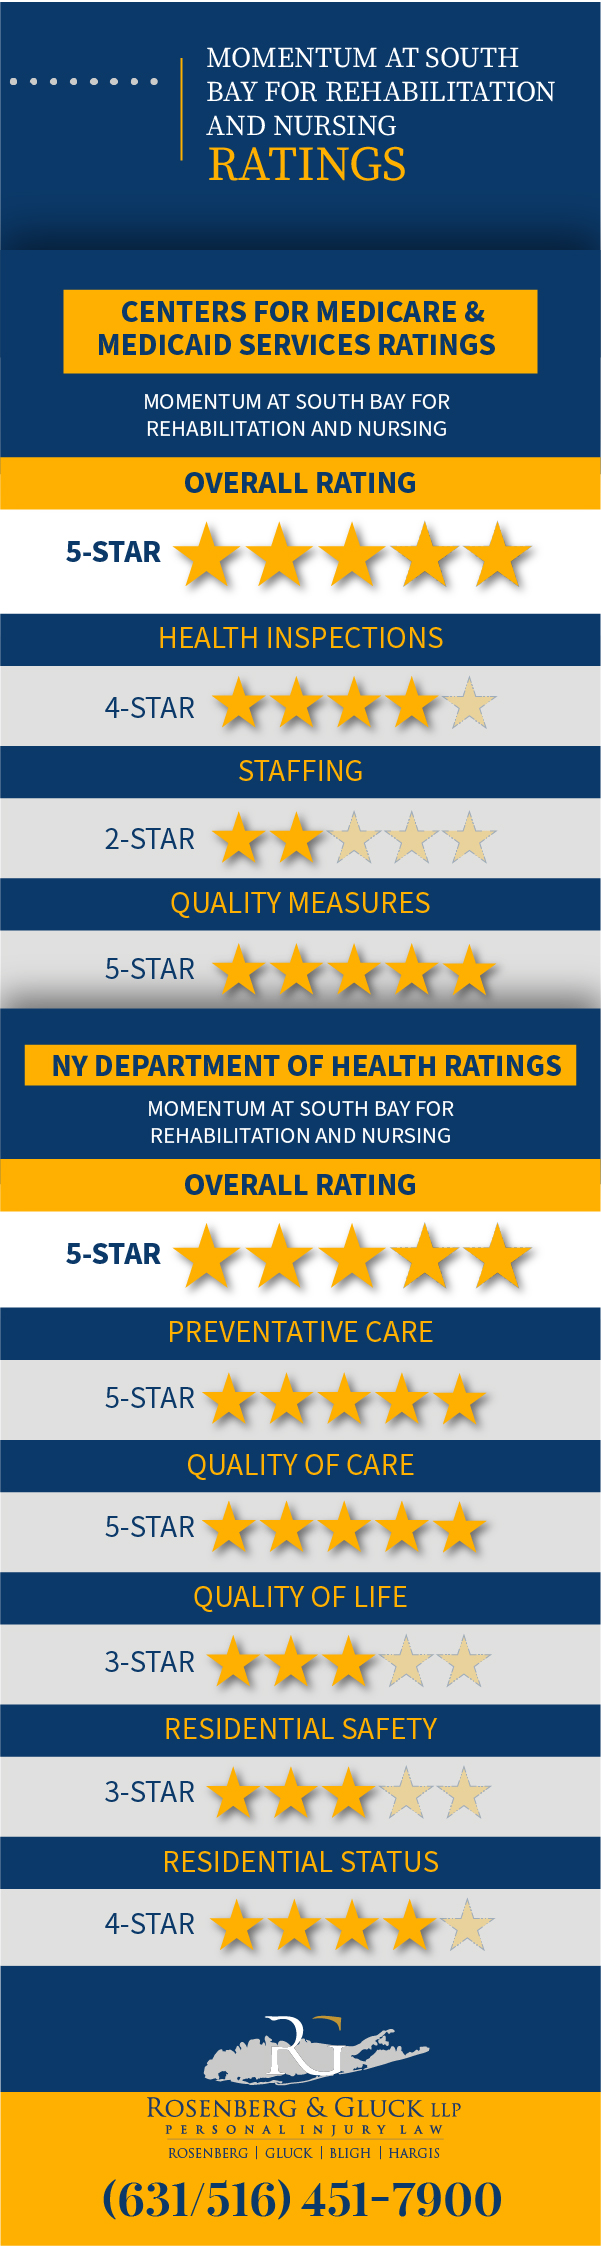 Momentum at South Bay for Rehabilitation and Nursing Violations and Ratings Infographic